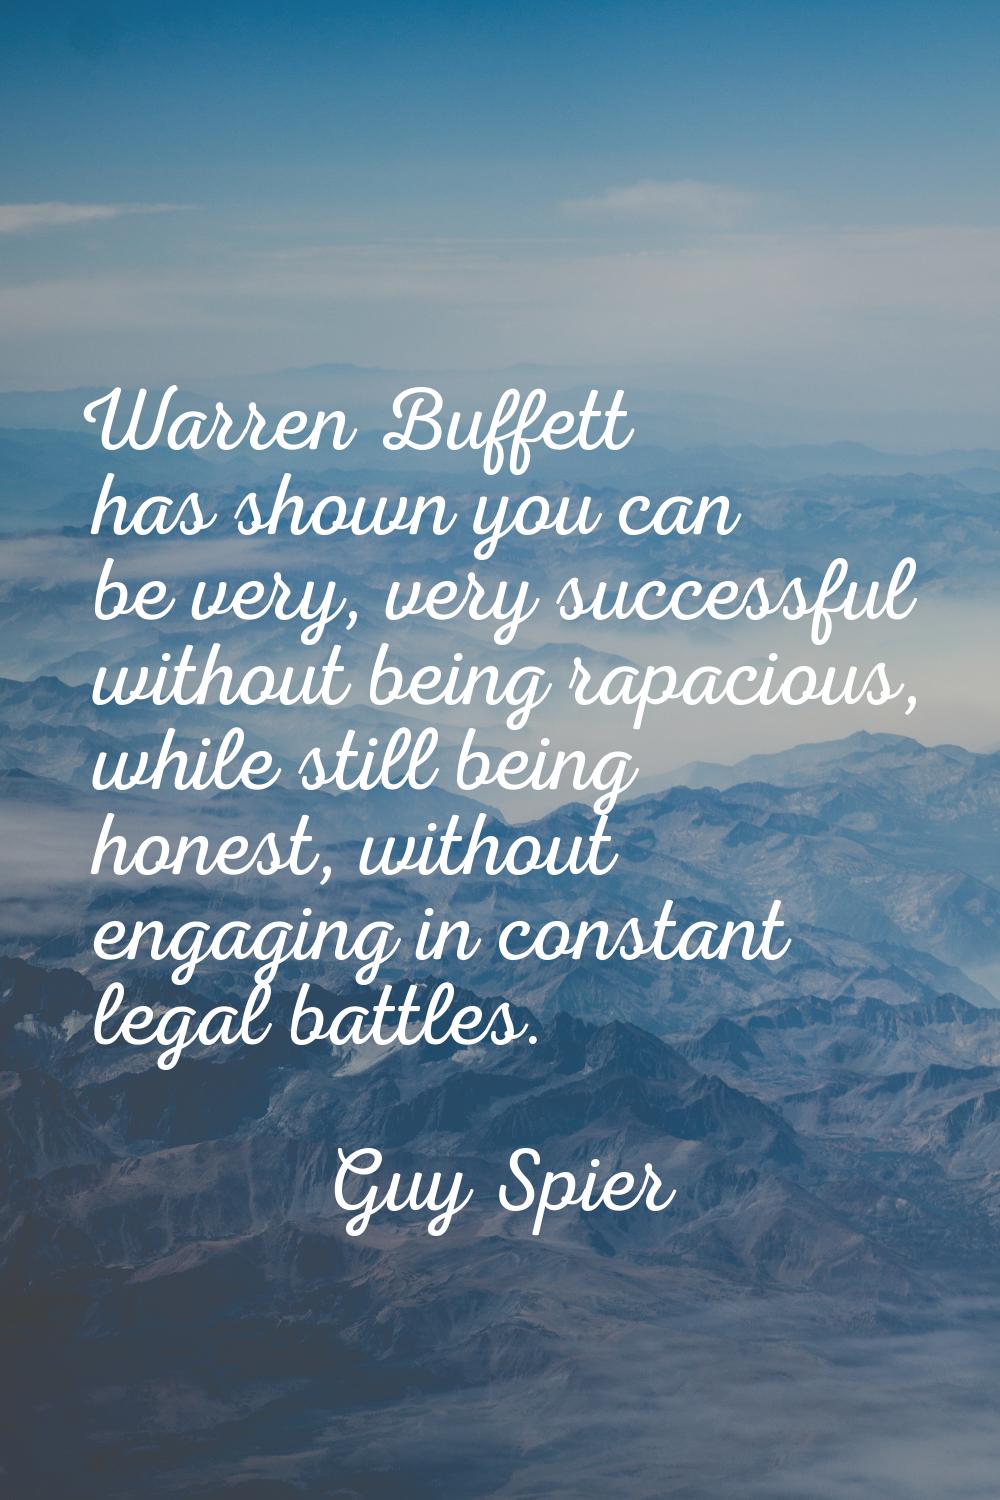 Warren Buffett has shown you can be very, very successful without being rapacious, while still bein